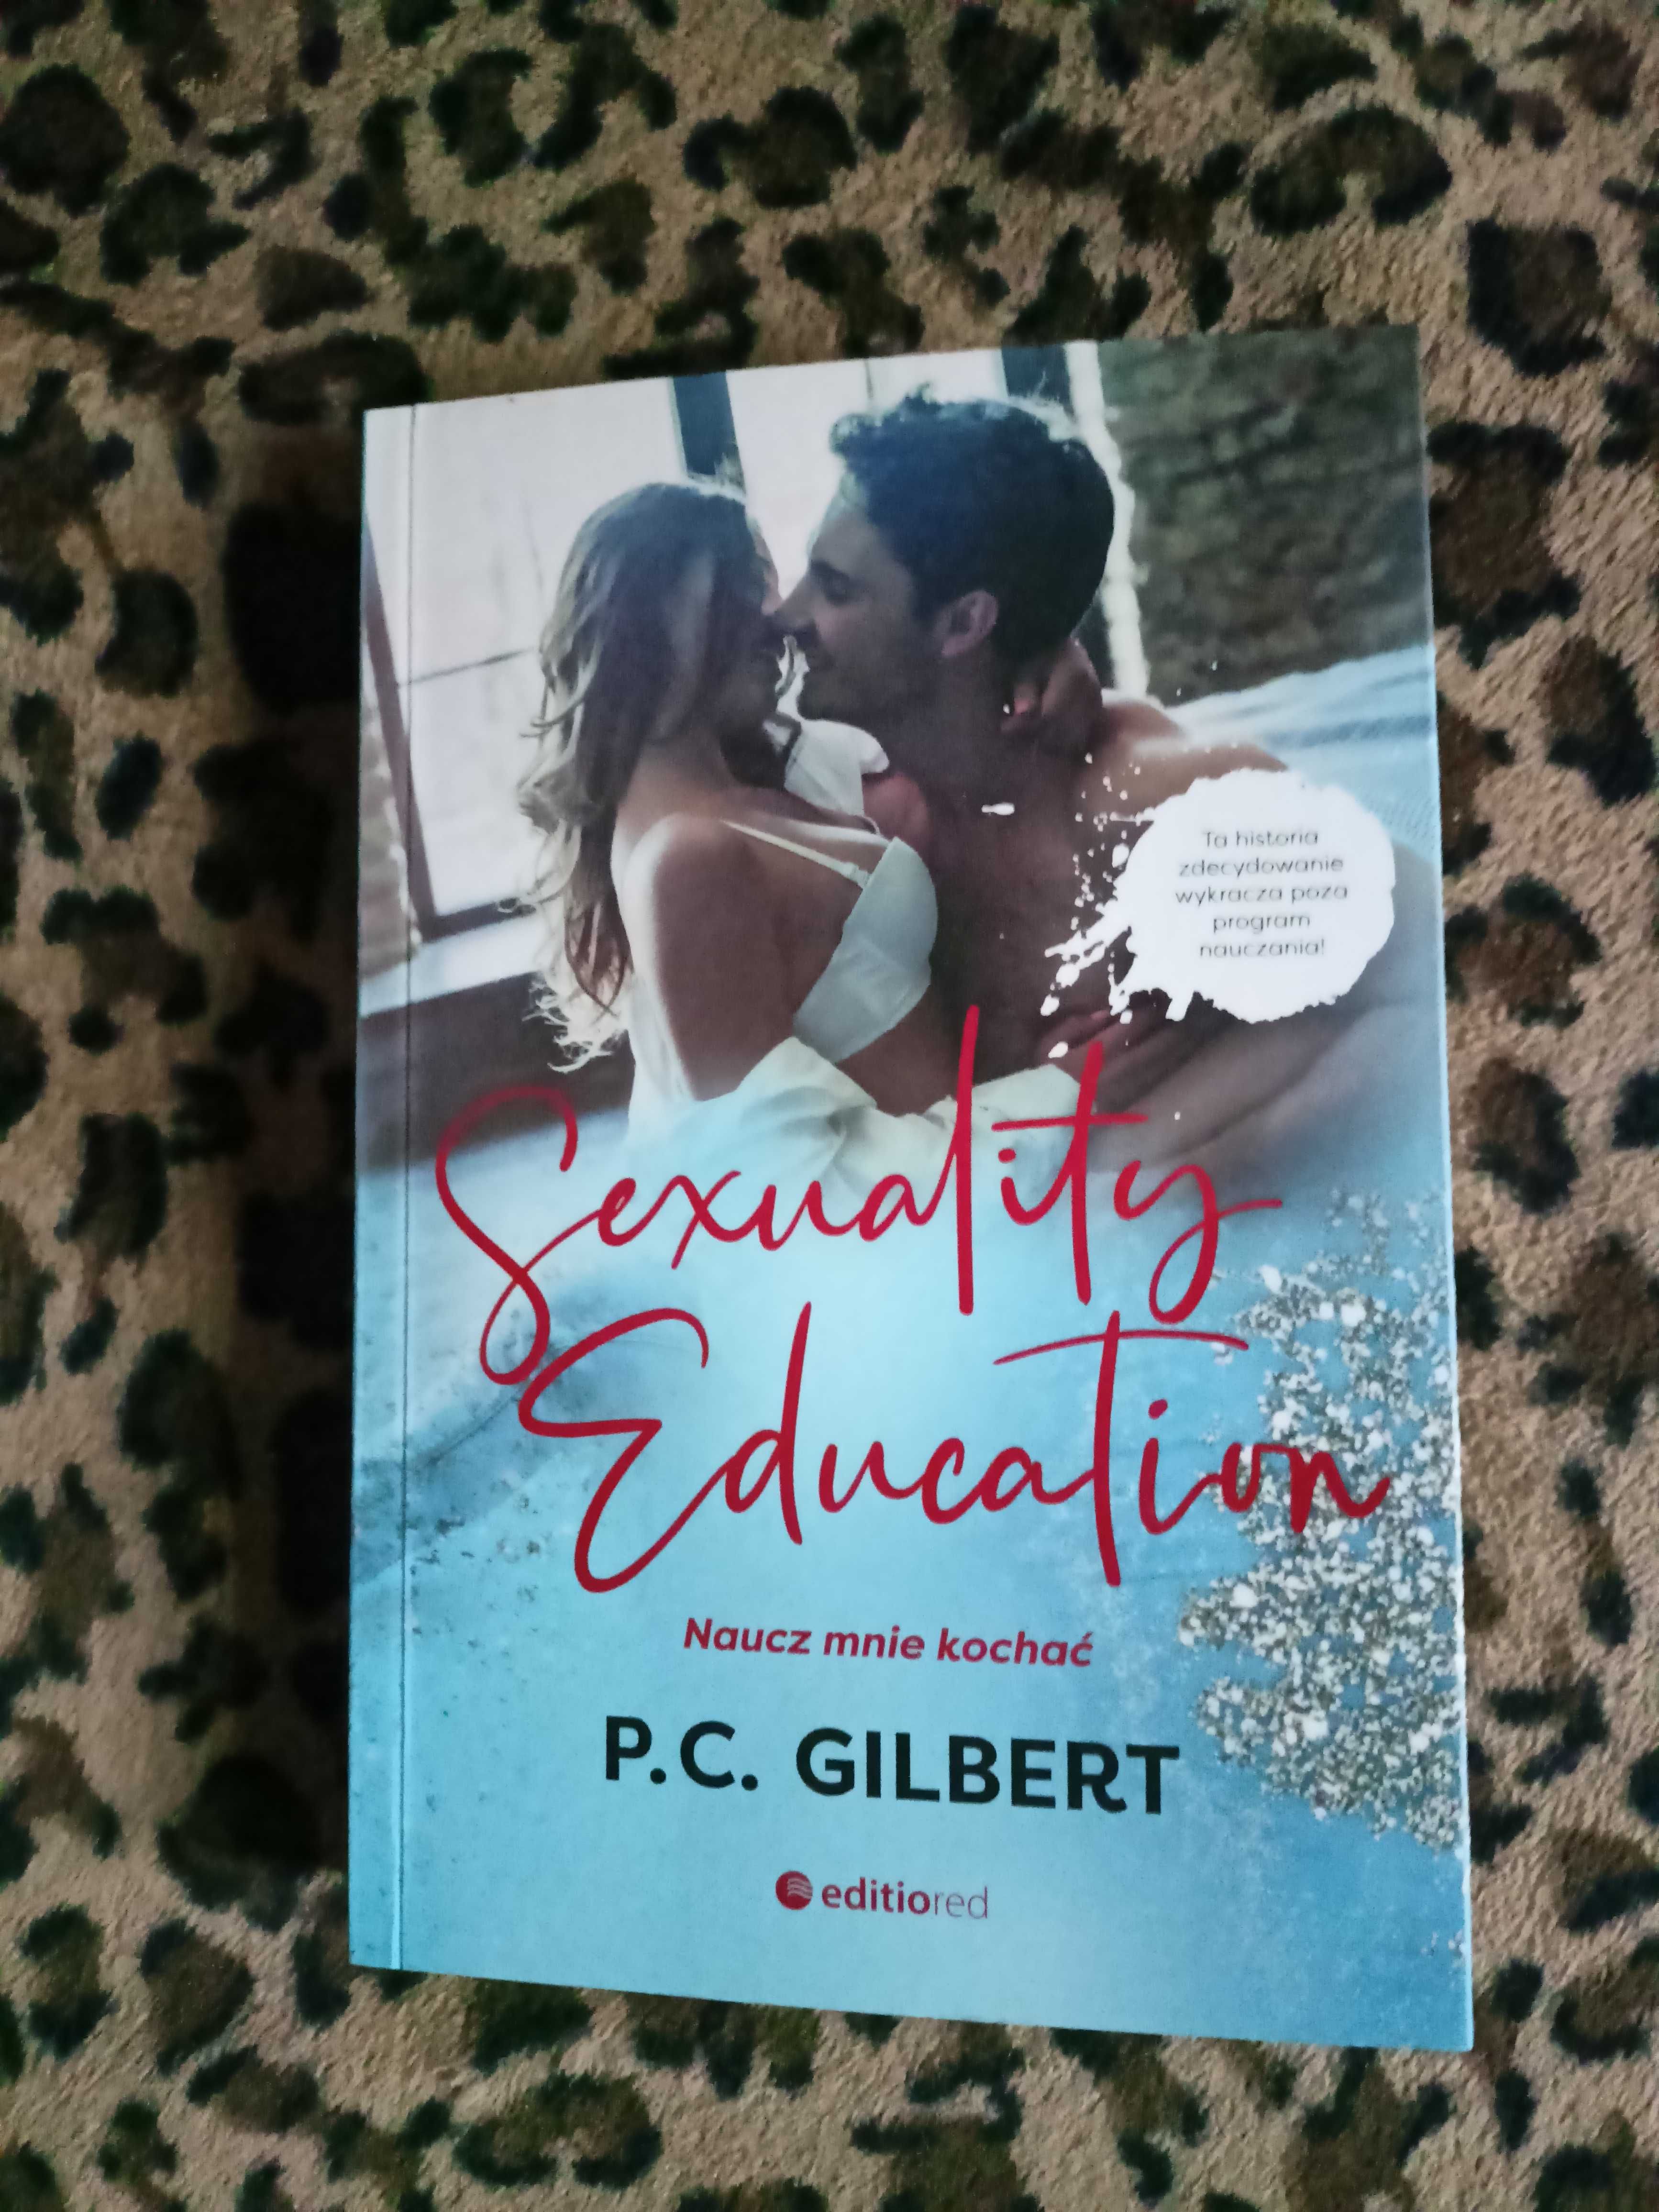 P.C. Gilbert - Sexuality education